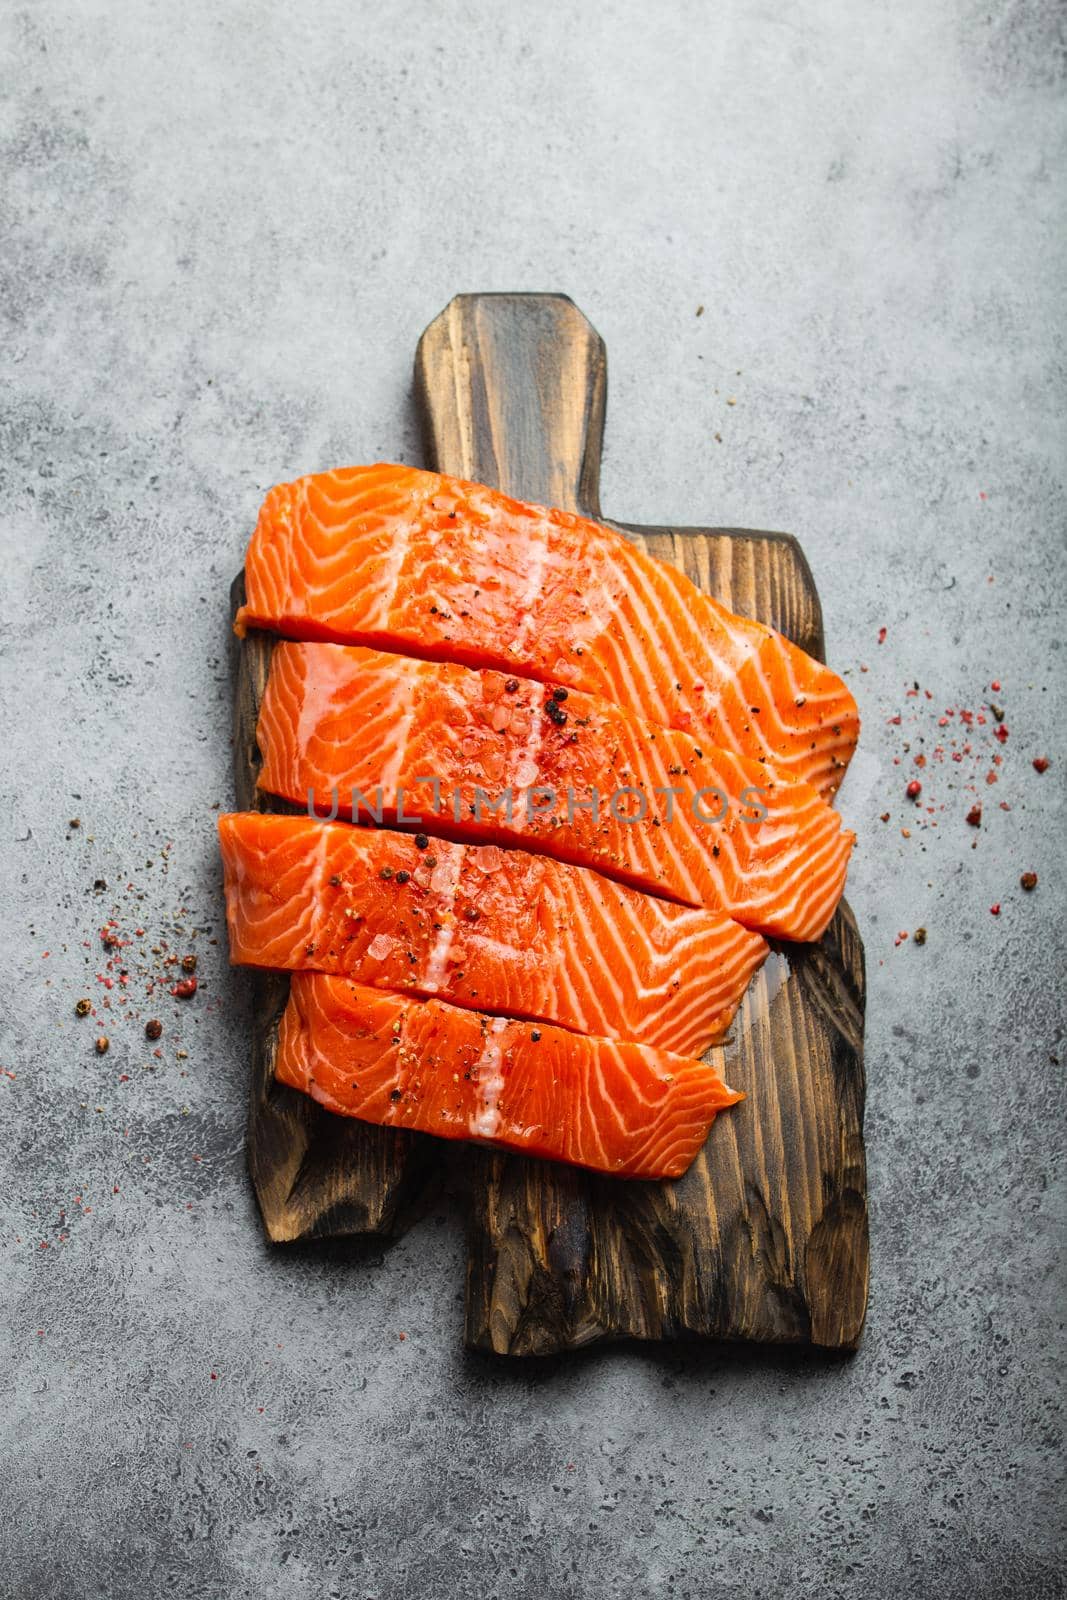 Top view, close-up of cut in slices fresh raw salmon fillet with seasonings on wooden board, gray stone background. Preparing salmon fillet for cooking, healthy eating concept